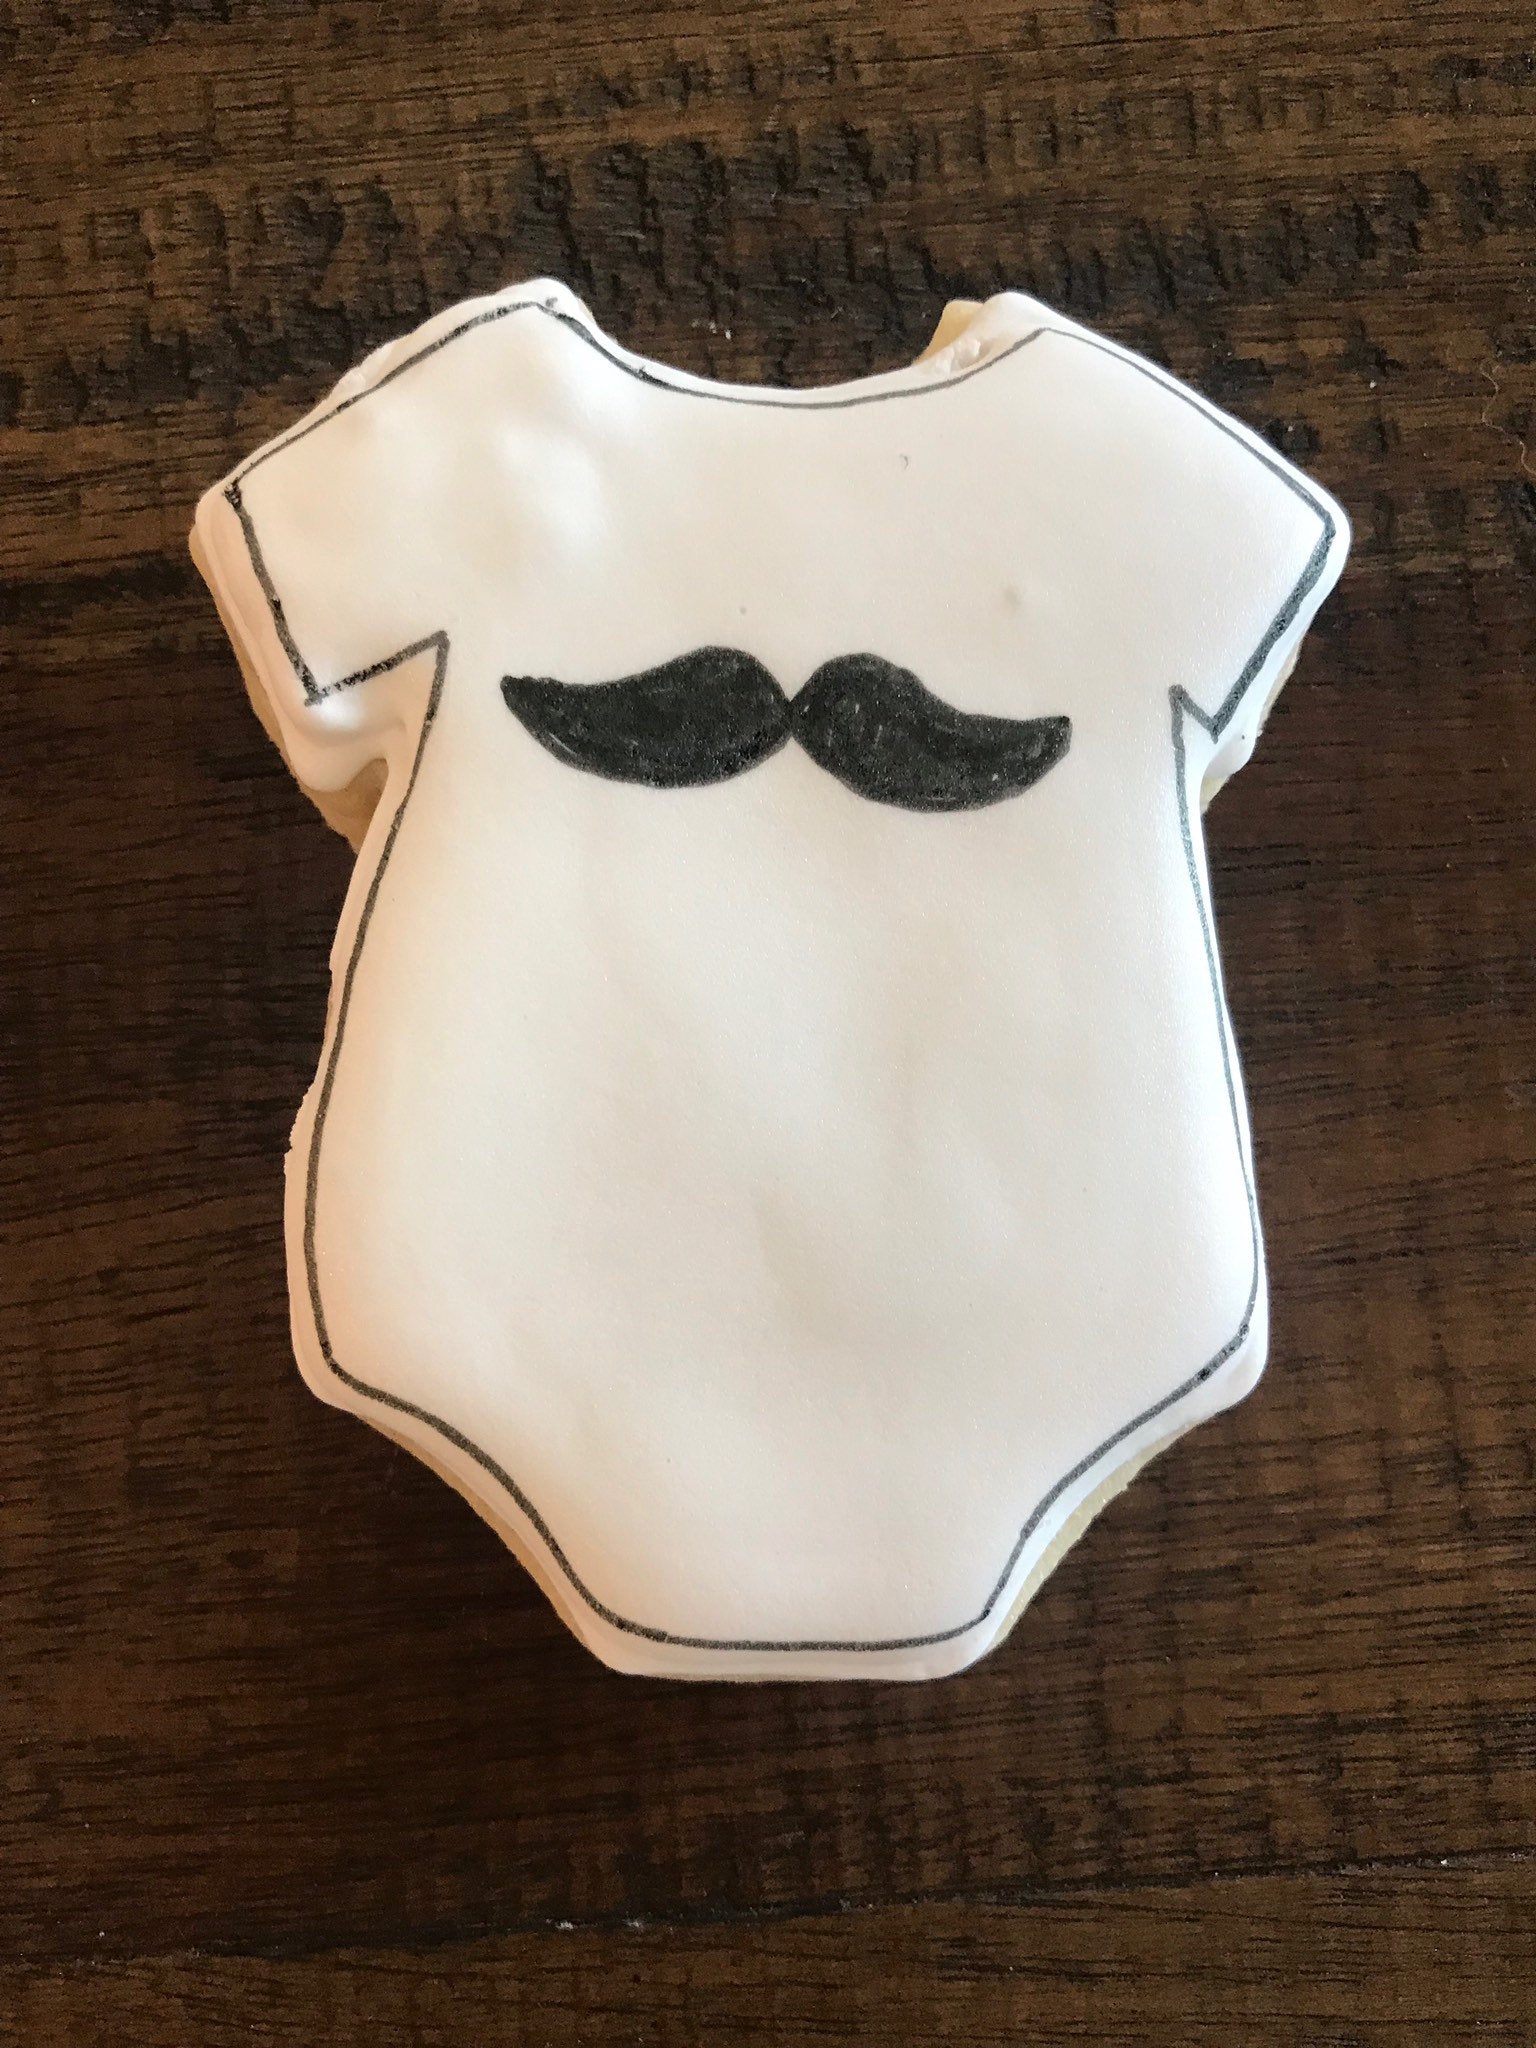 Cookie Cutter – Onesie - Be Made